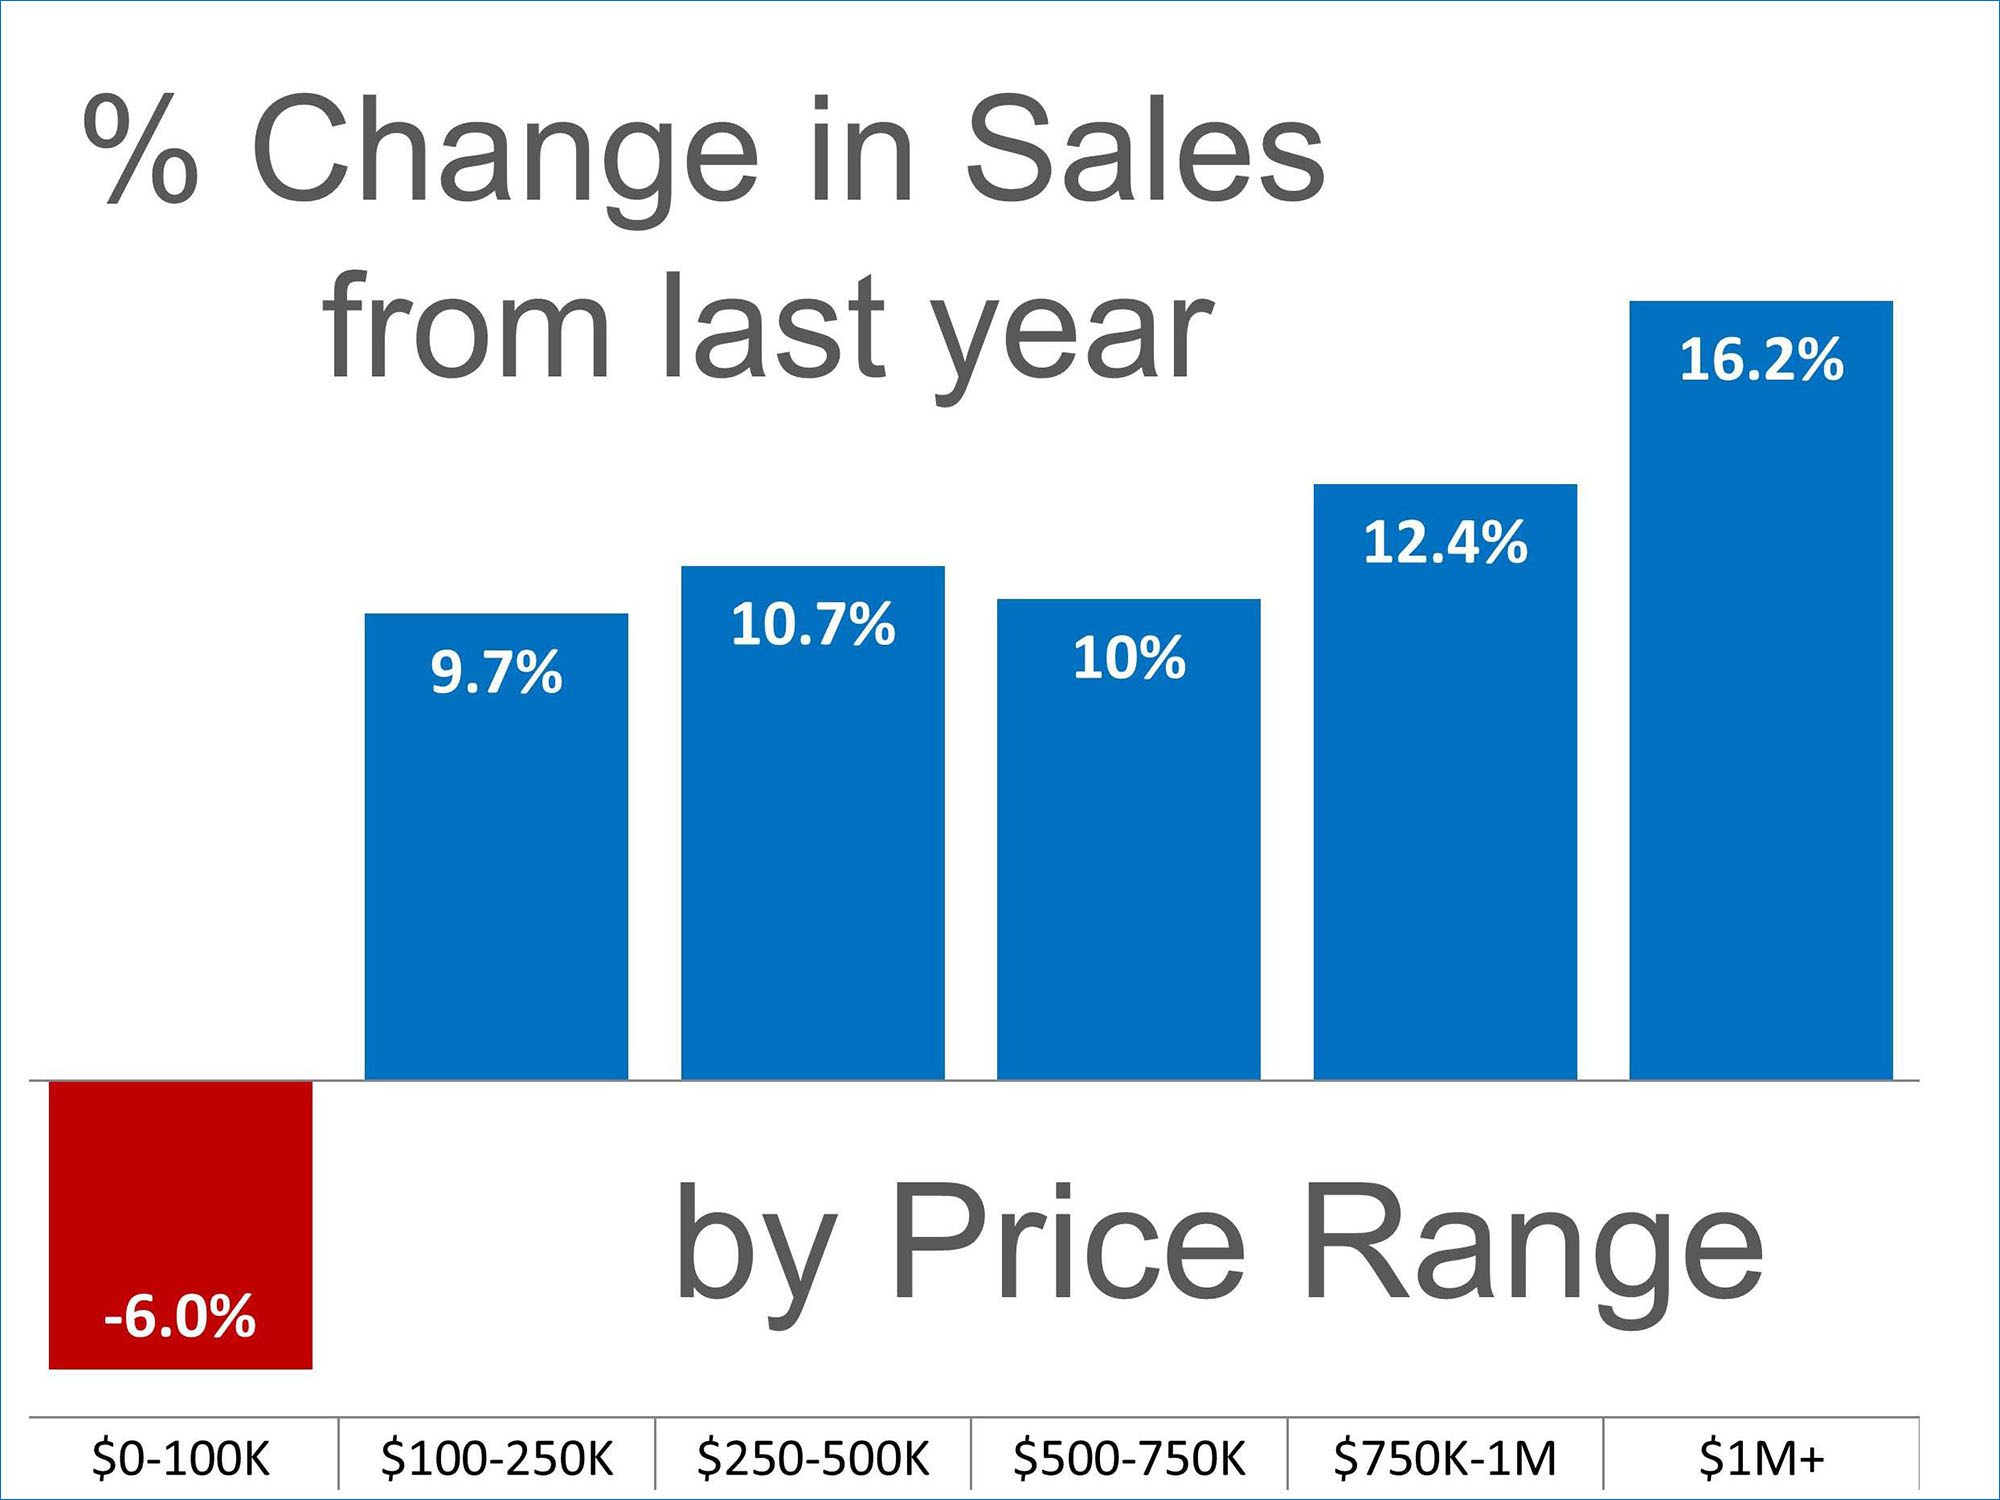 Sales Up in almost Every Price Range | Keeping Current Matters